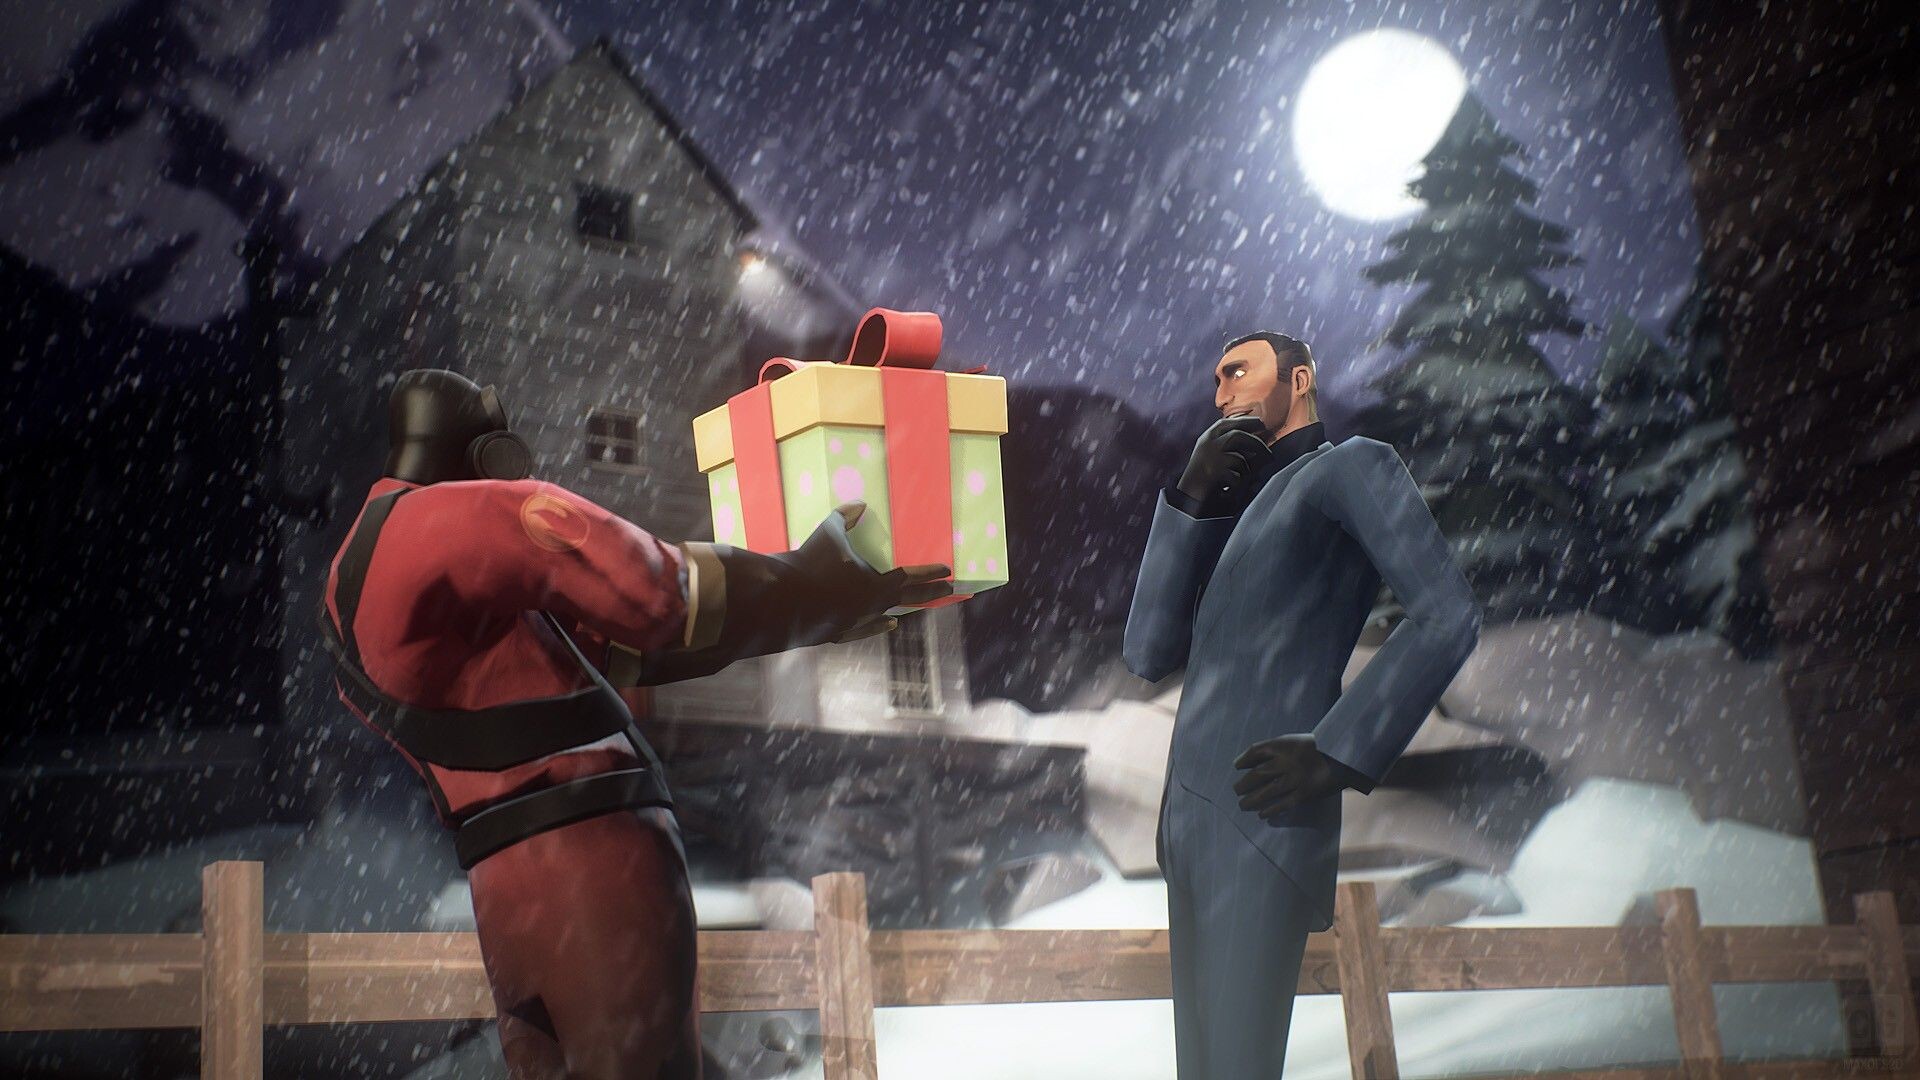 Garry's Mod: Pyro gives a Christmas present to the Spy, Fan made content based on Team Fortress 2 video game. 1920x1080 Full HD Wallpaper.